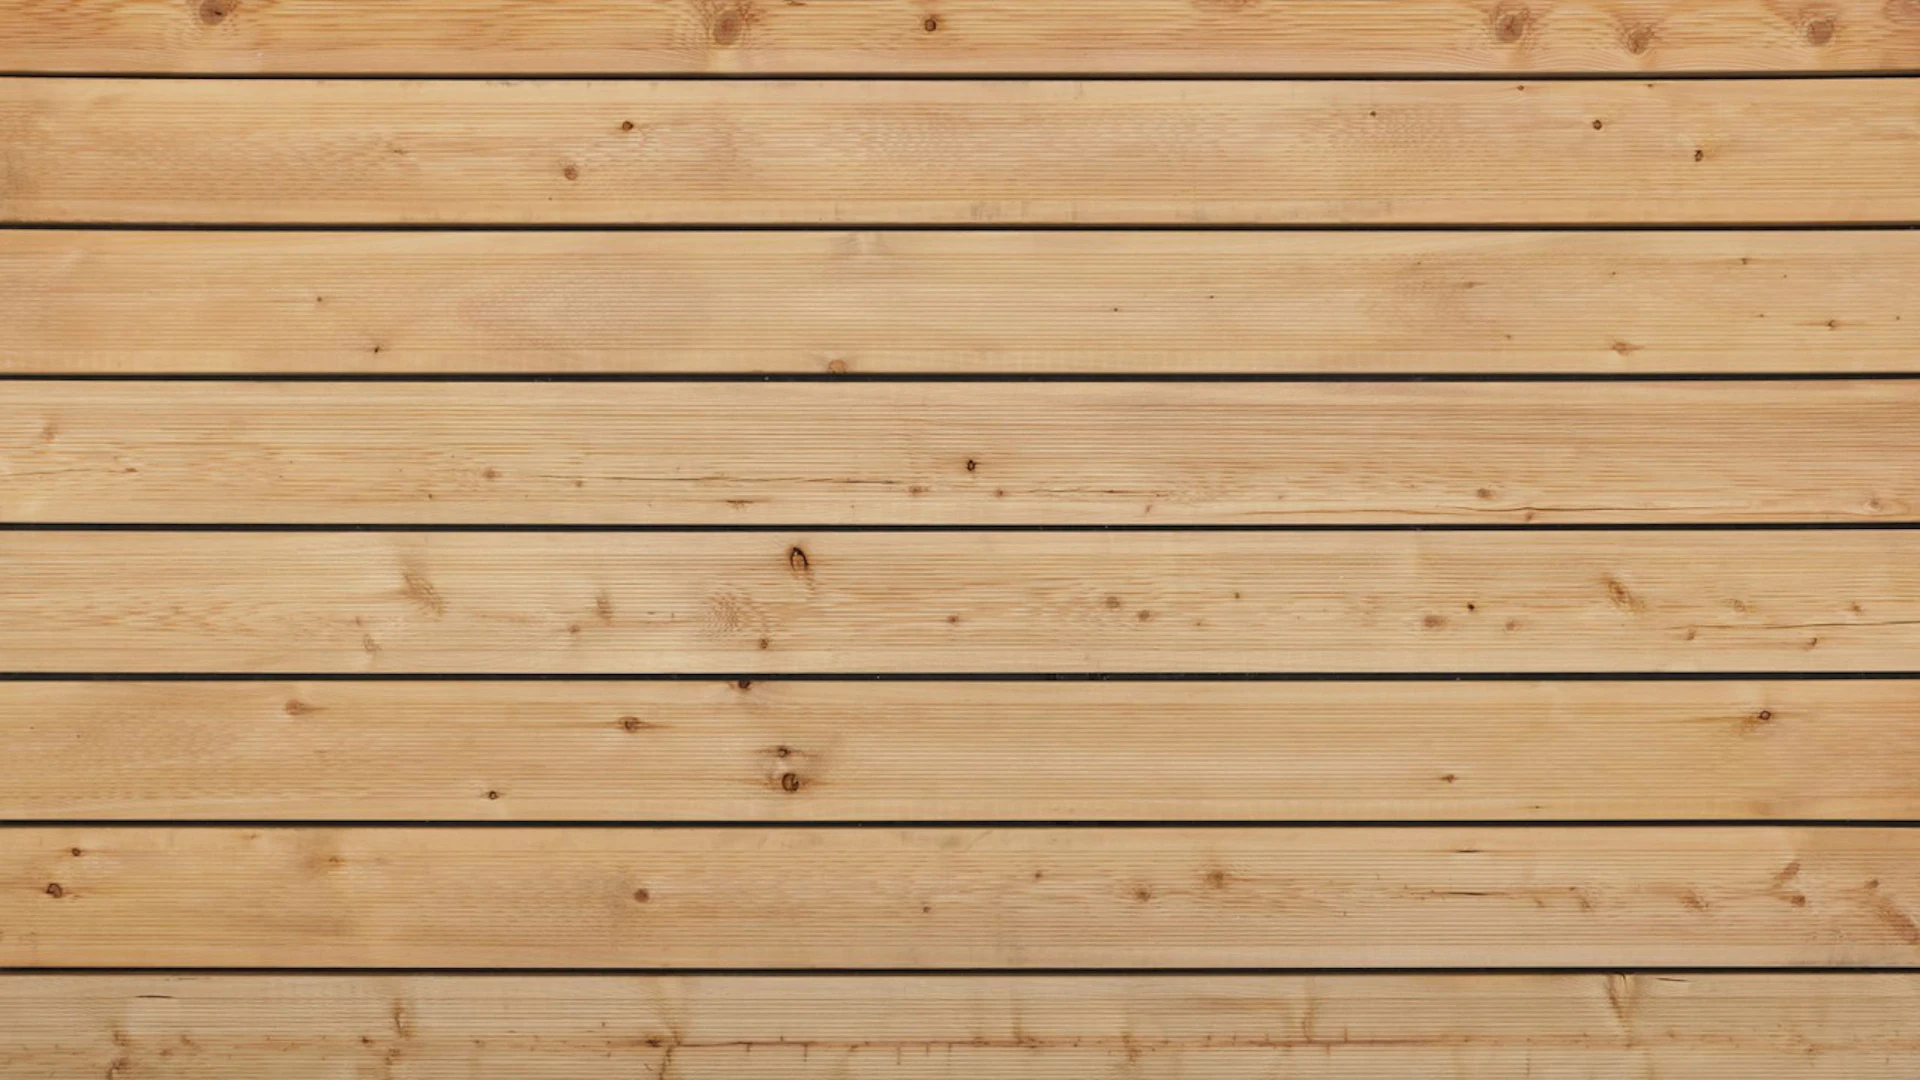 TerraWood wooden decking larch siberian A/B 28 x 142mm - grooved/grooved